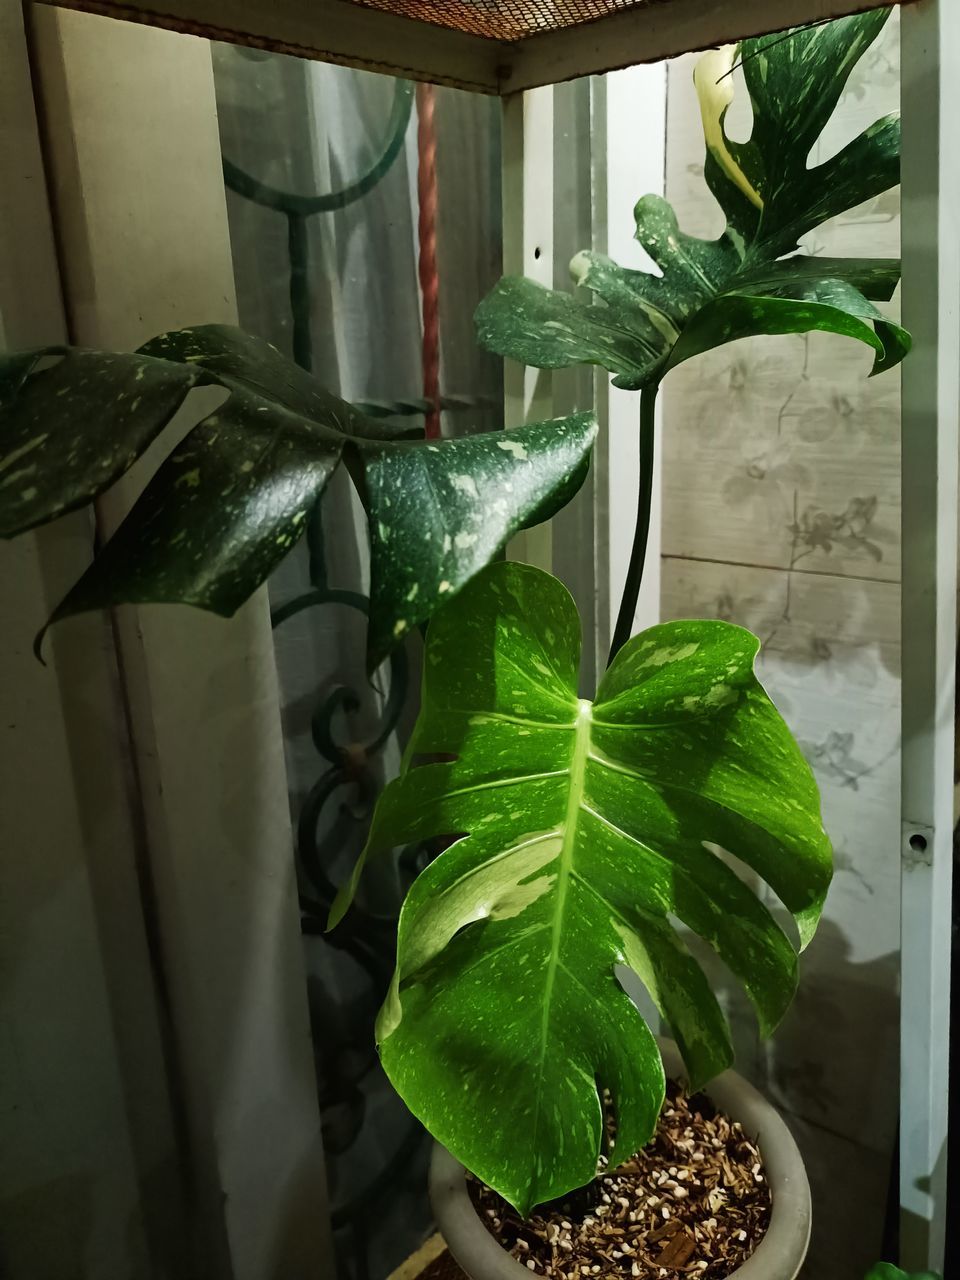 leaf, plant part, green, plant, growth, indoors, nature, food, food and drink, houseplant, freshness, no people, flower, potted plant, herb, floristry, healthy eating, window, wellbeing, glass